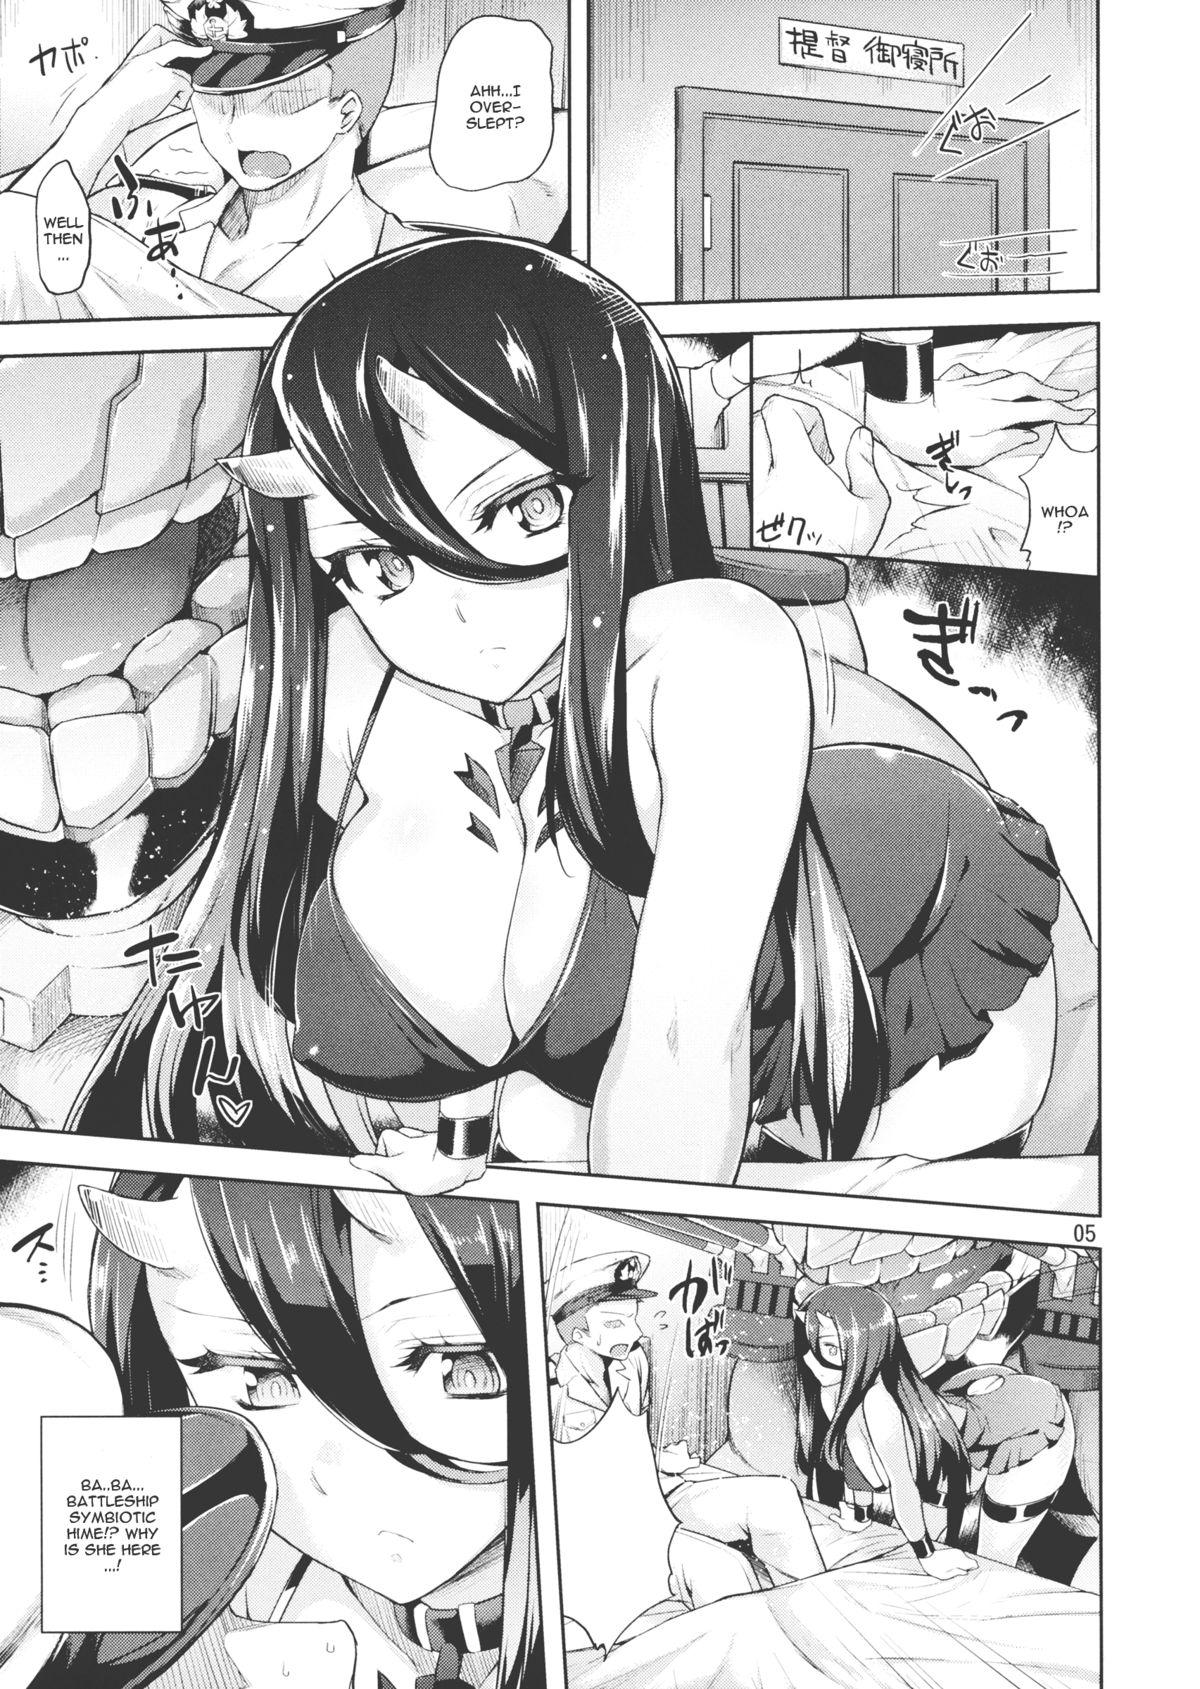 Euro Porn Amicable Unseen Entity - Kantai collection Sucking Dick - Page 4